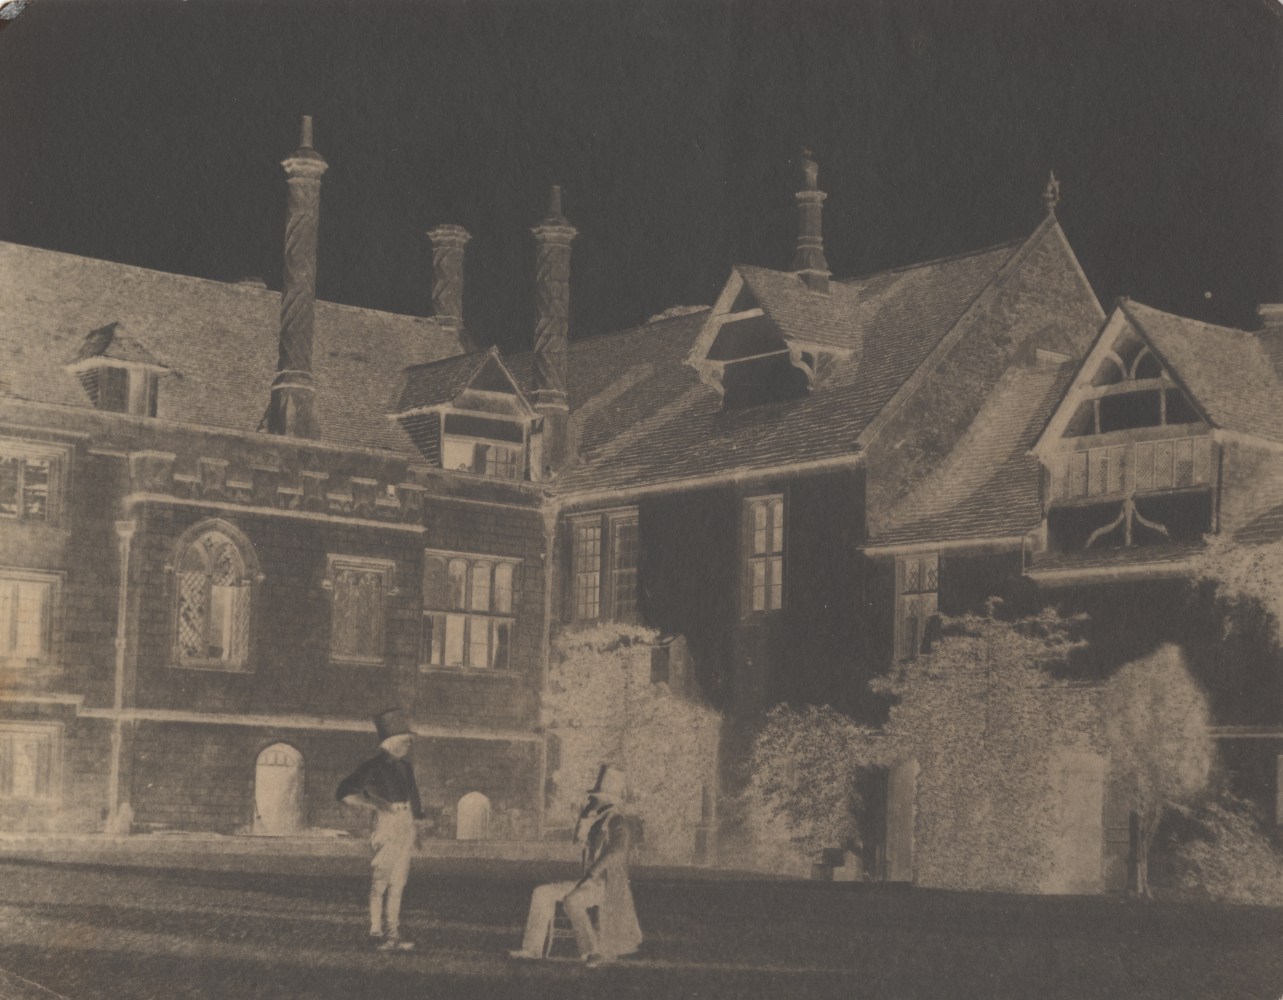 William Henry Fox TALBOT (English, 1800-1877) Talbot converses with an Acolyte in the North Courtyard of Lacock Abbey, 1841-1844 Calotype negative, waxed 15.9 x 20.0 cm